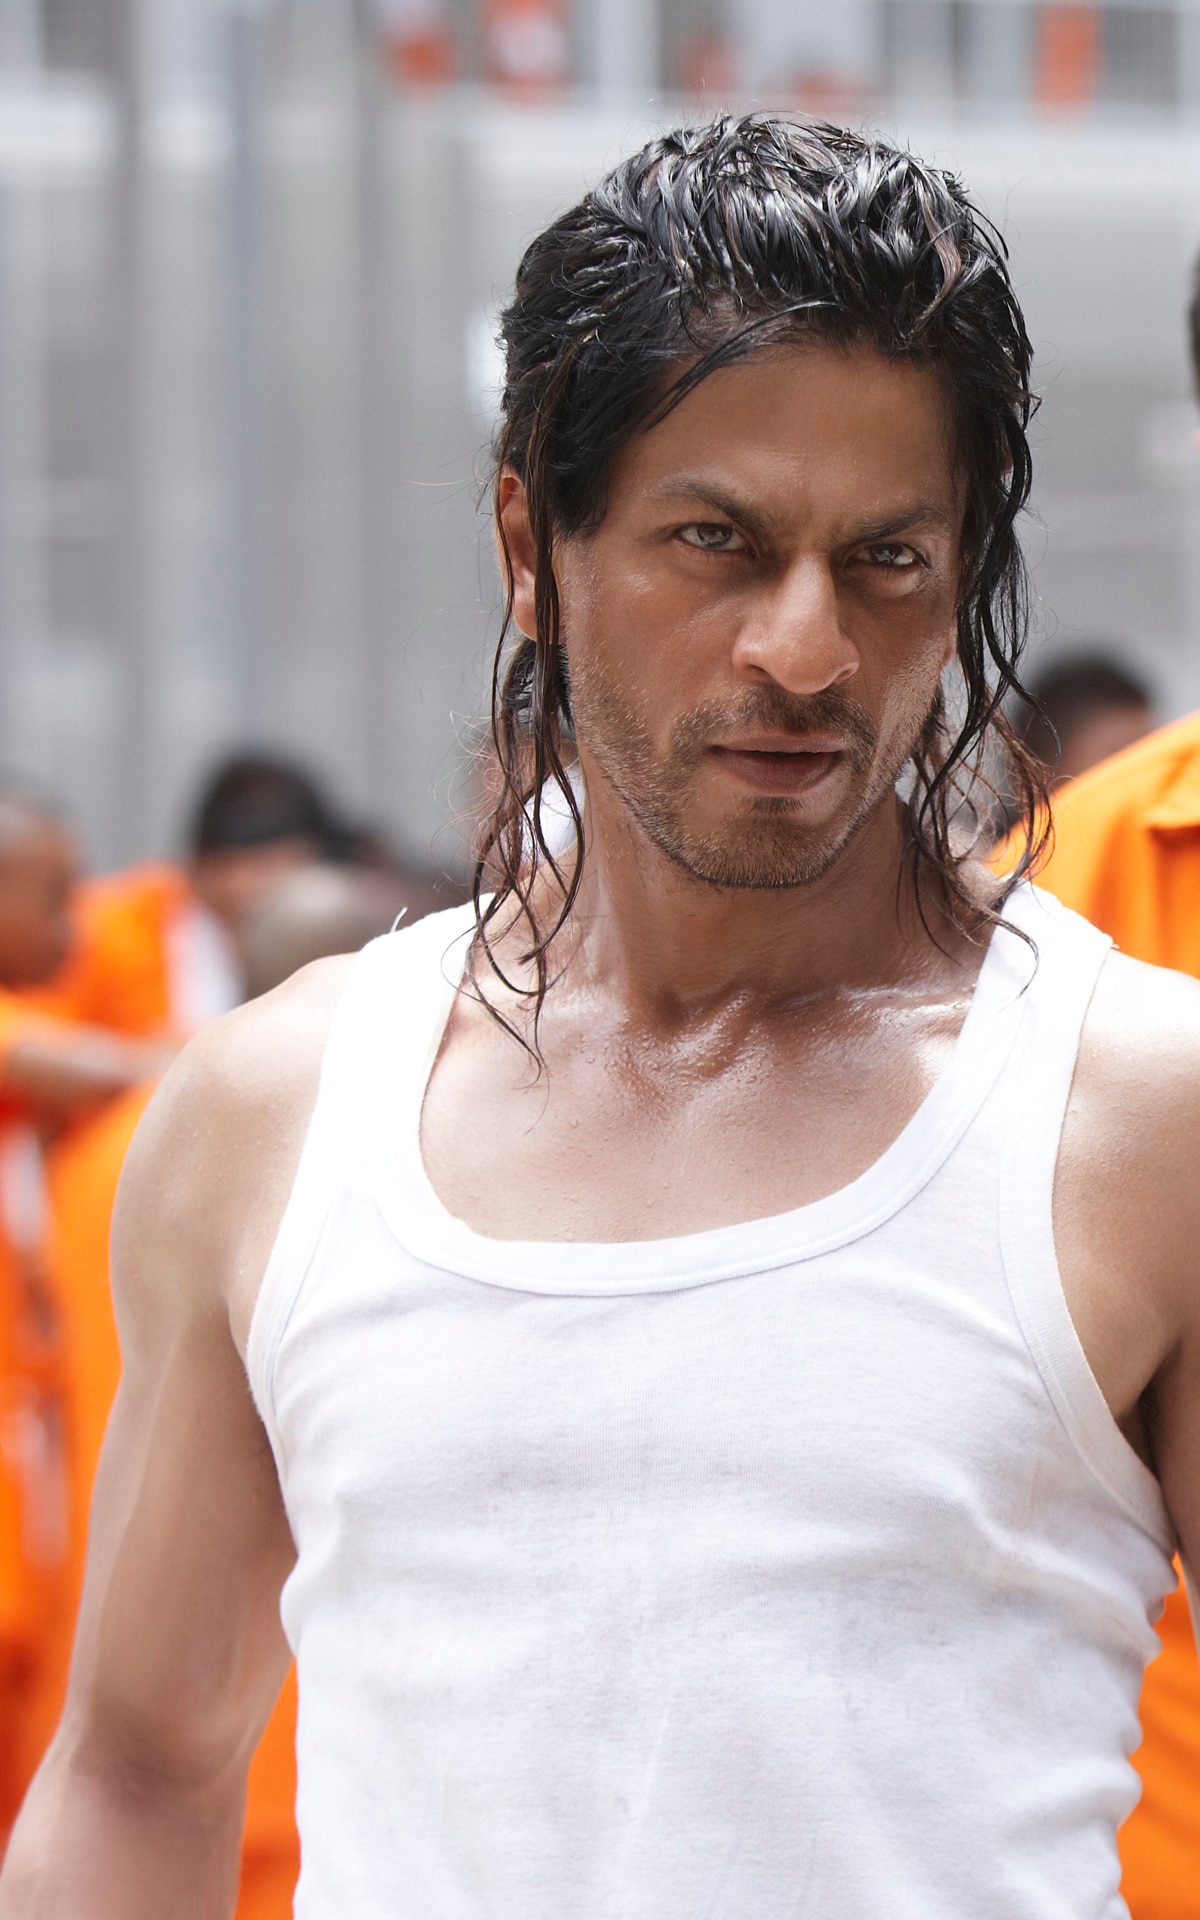 Shahrukh khan hairstyle. The Impact of Shahrukh Khan's Hairstyles on Pop  Culture